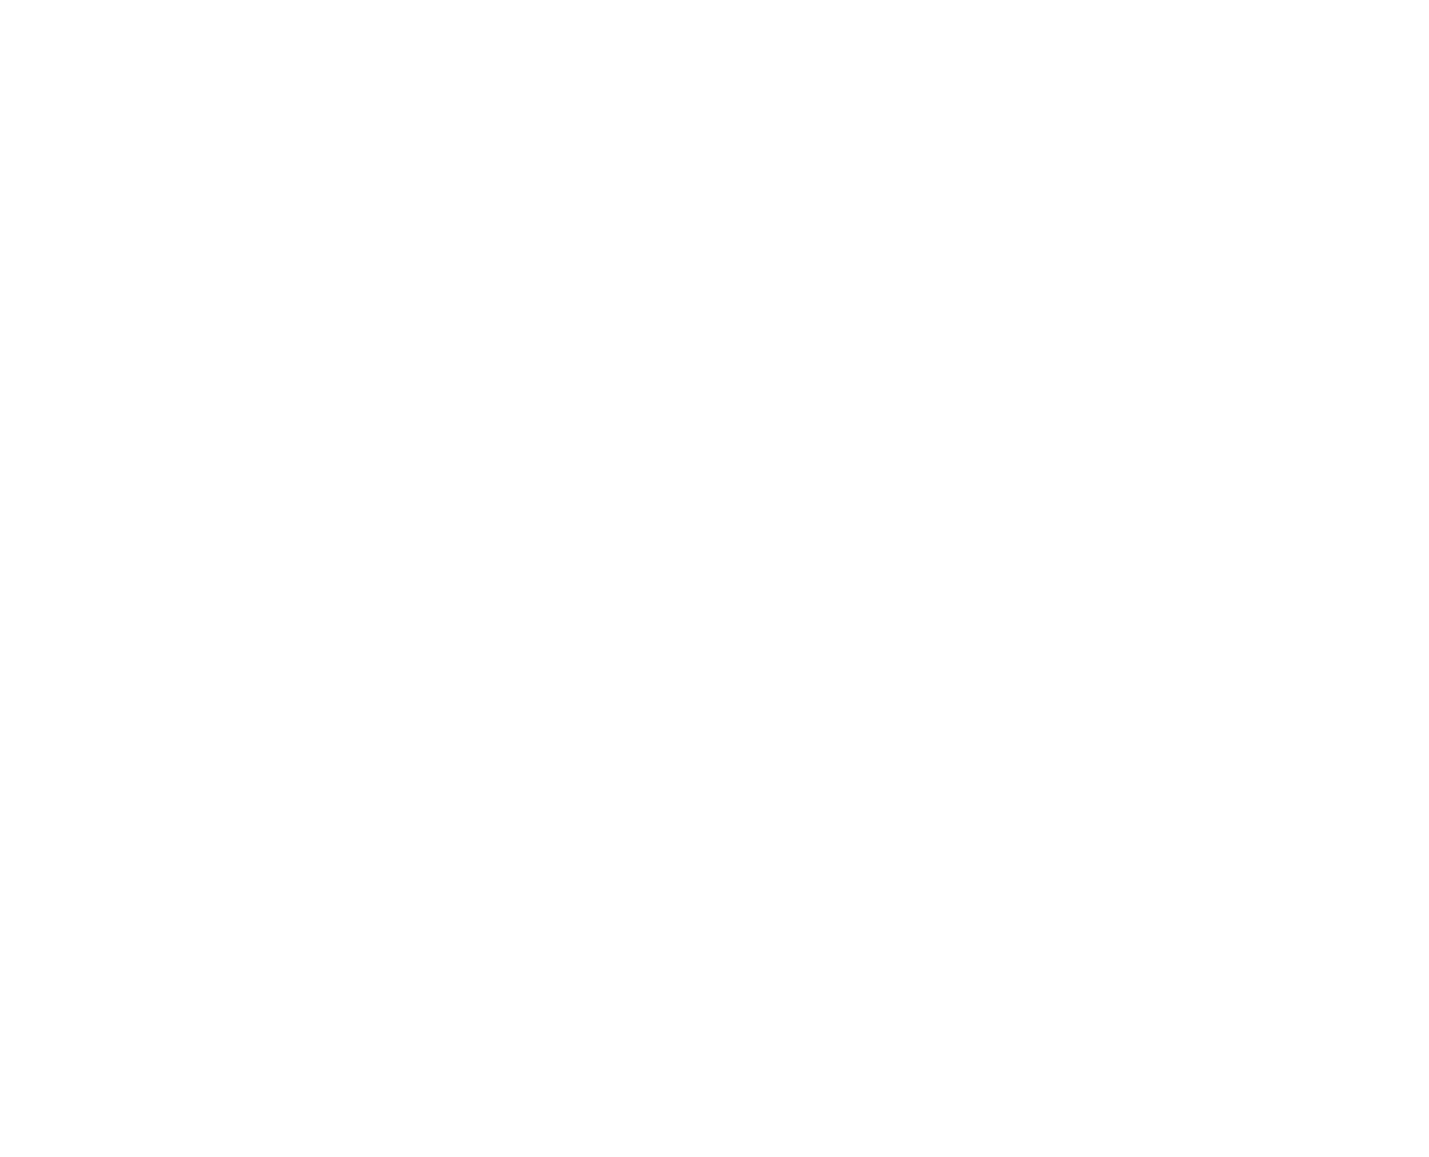 Abt Logo - Abt Logo Usage and Guidelines